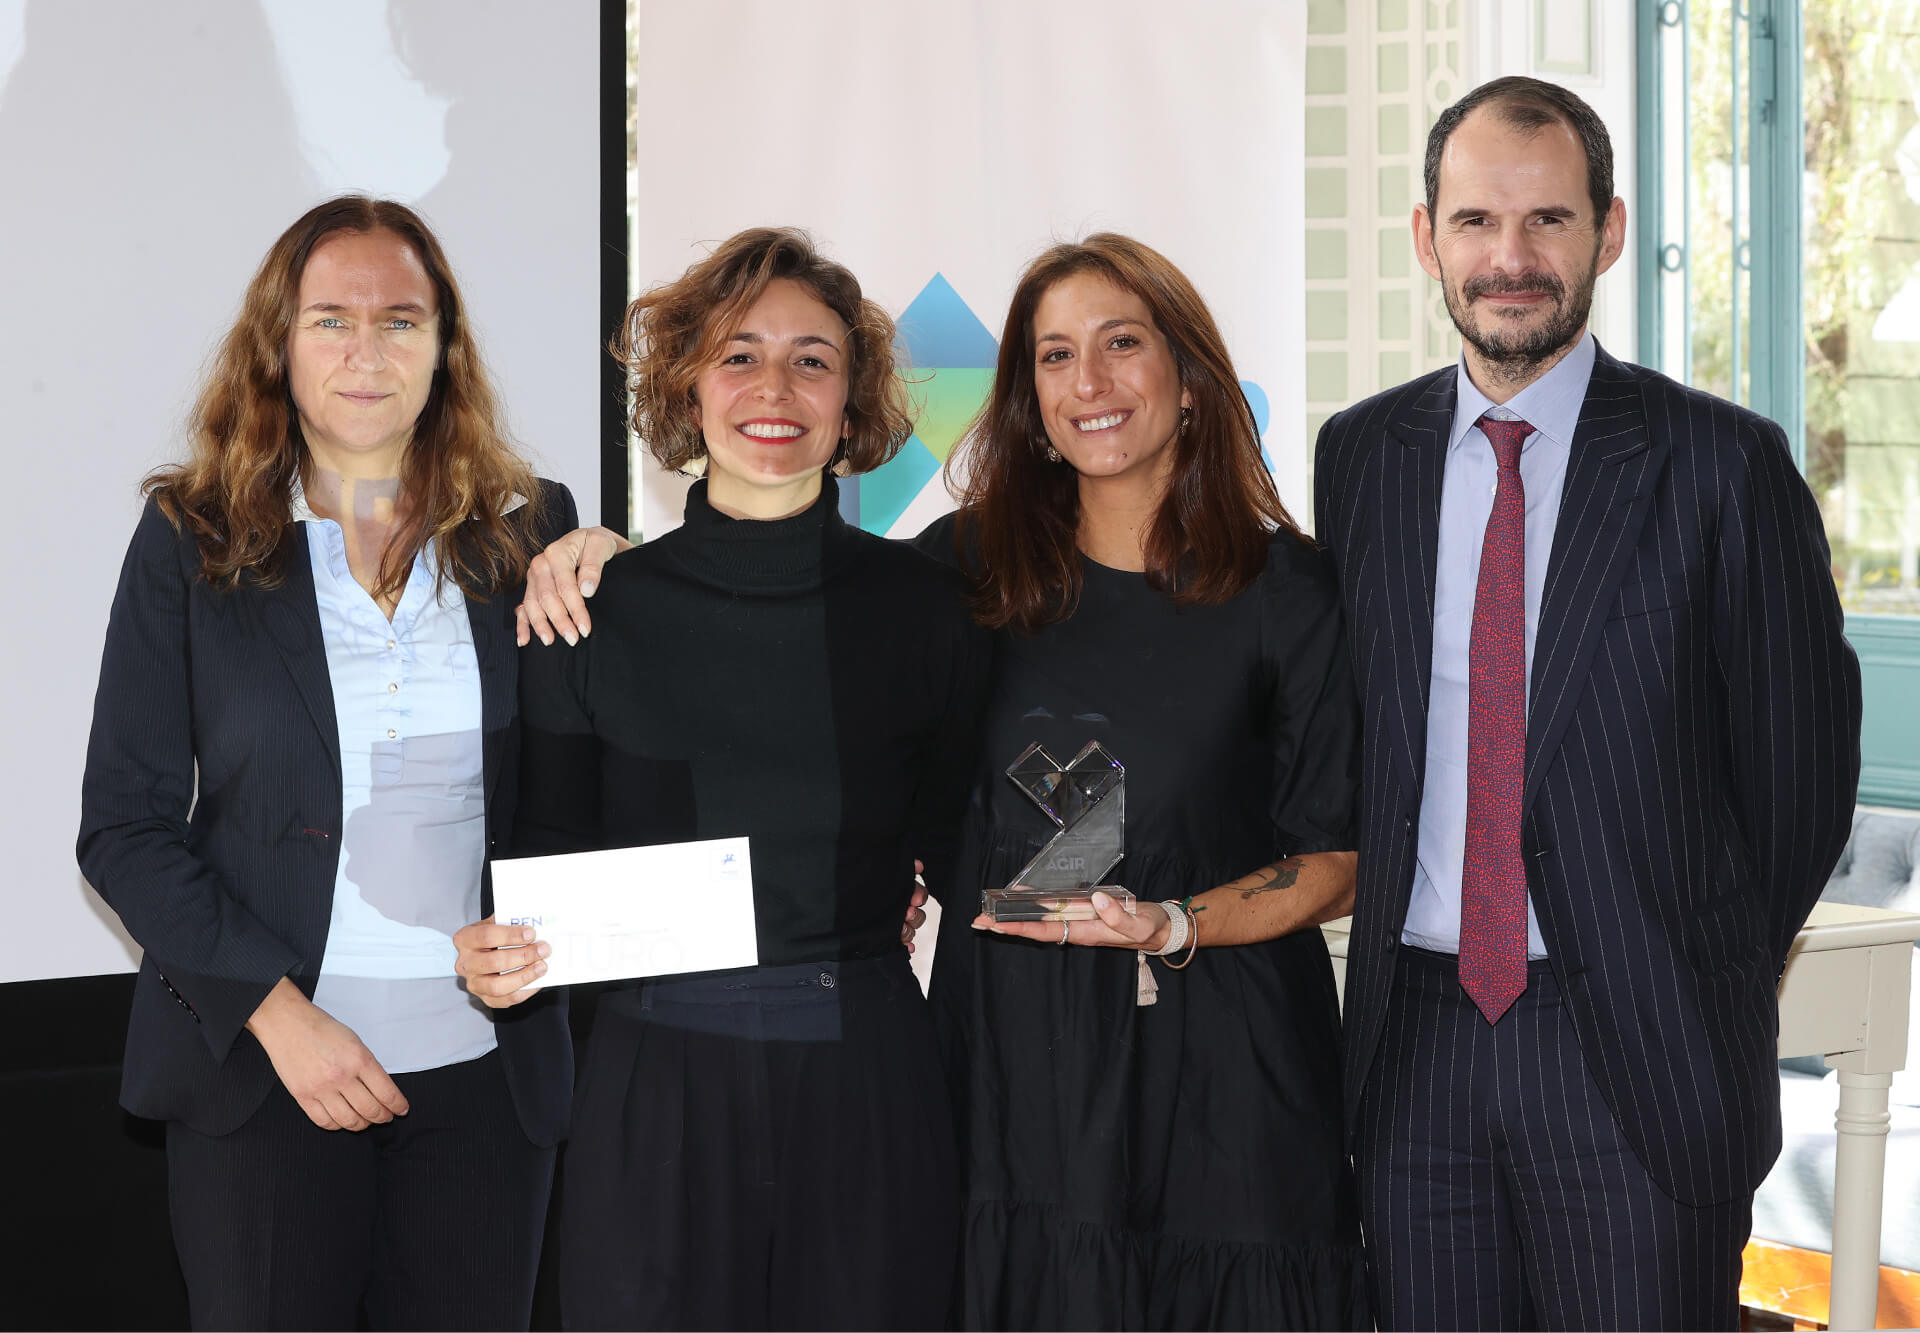 3rd Prize - Rizoma Cooperativa Integral's Community Grocery project